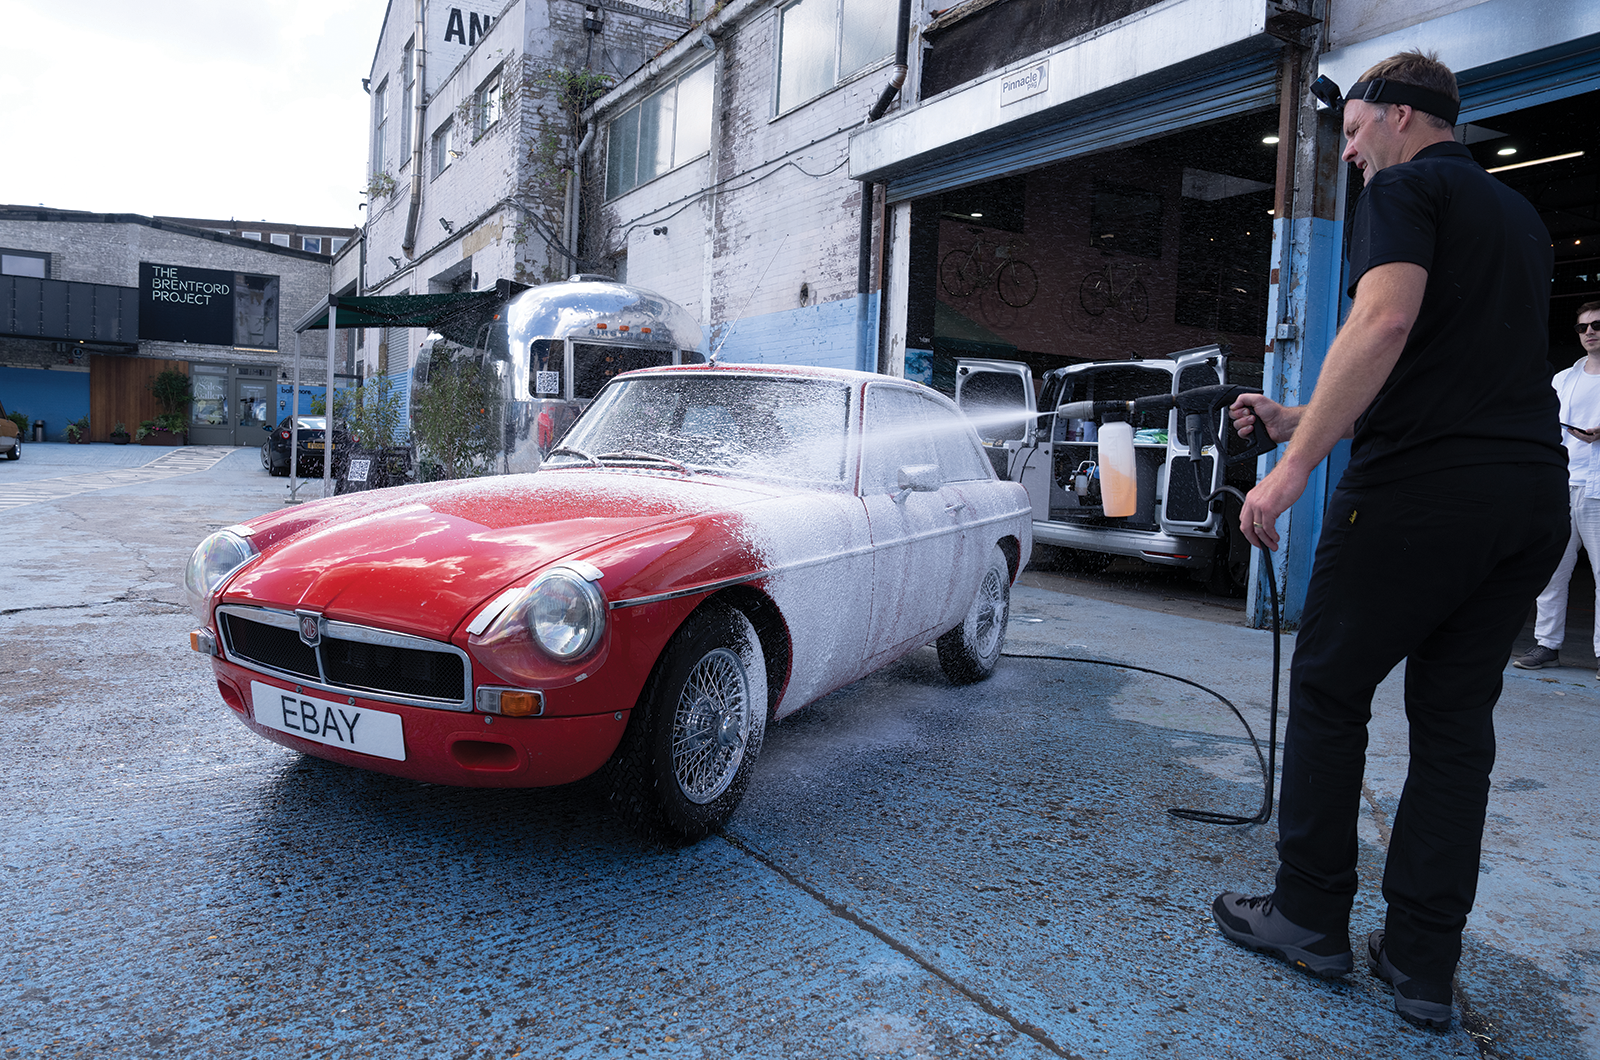 Classic & Sports Car – The specialist: Perfection Detailing